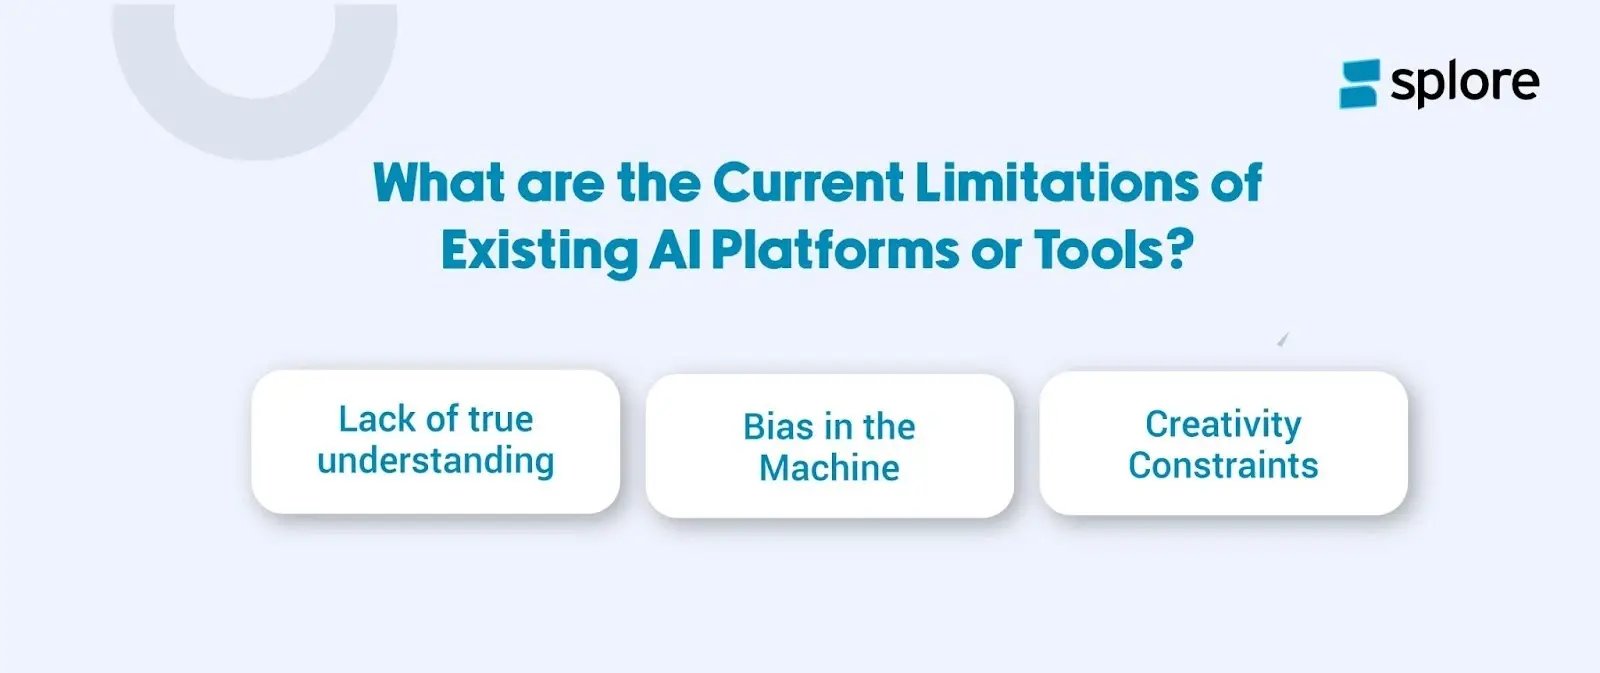 What are the Current Limitations of Existing AI Platforms or Tools